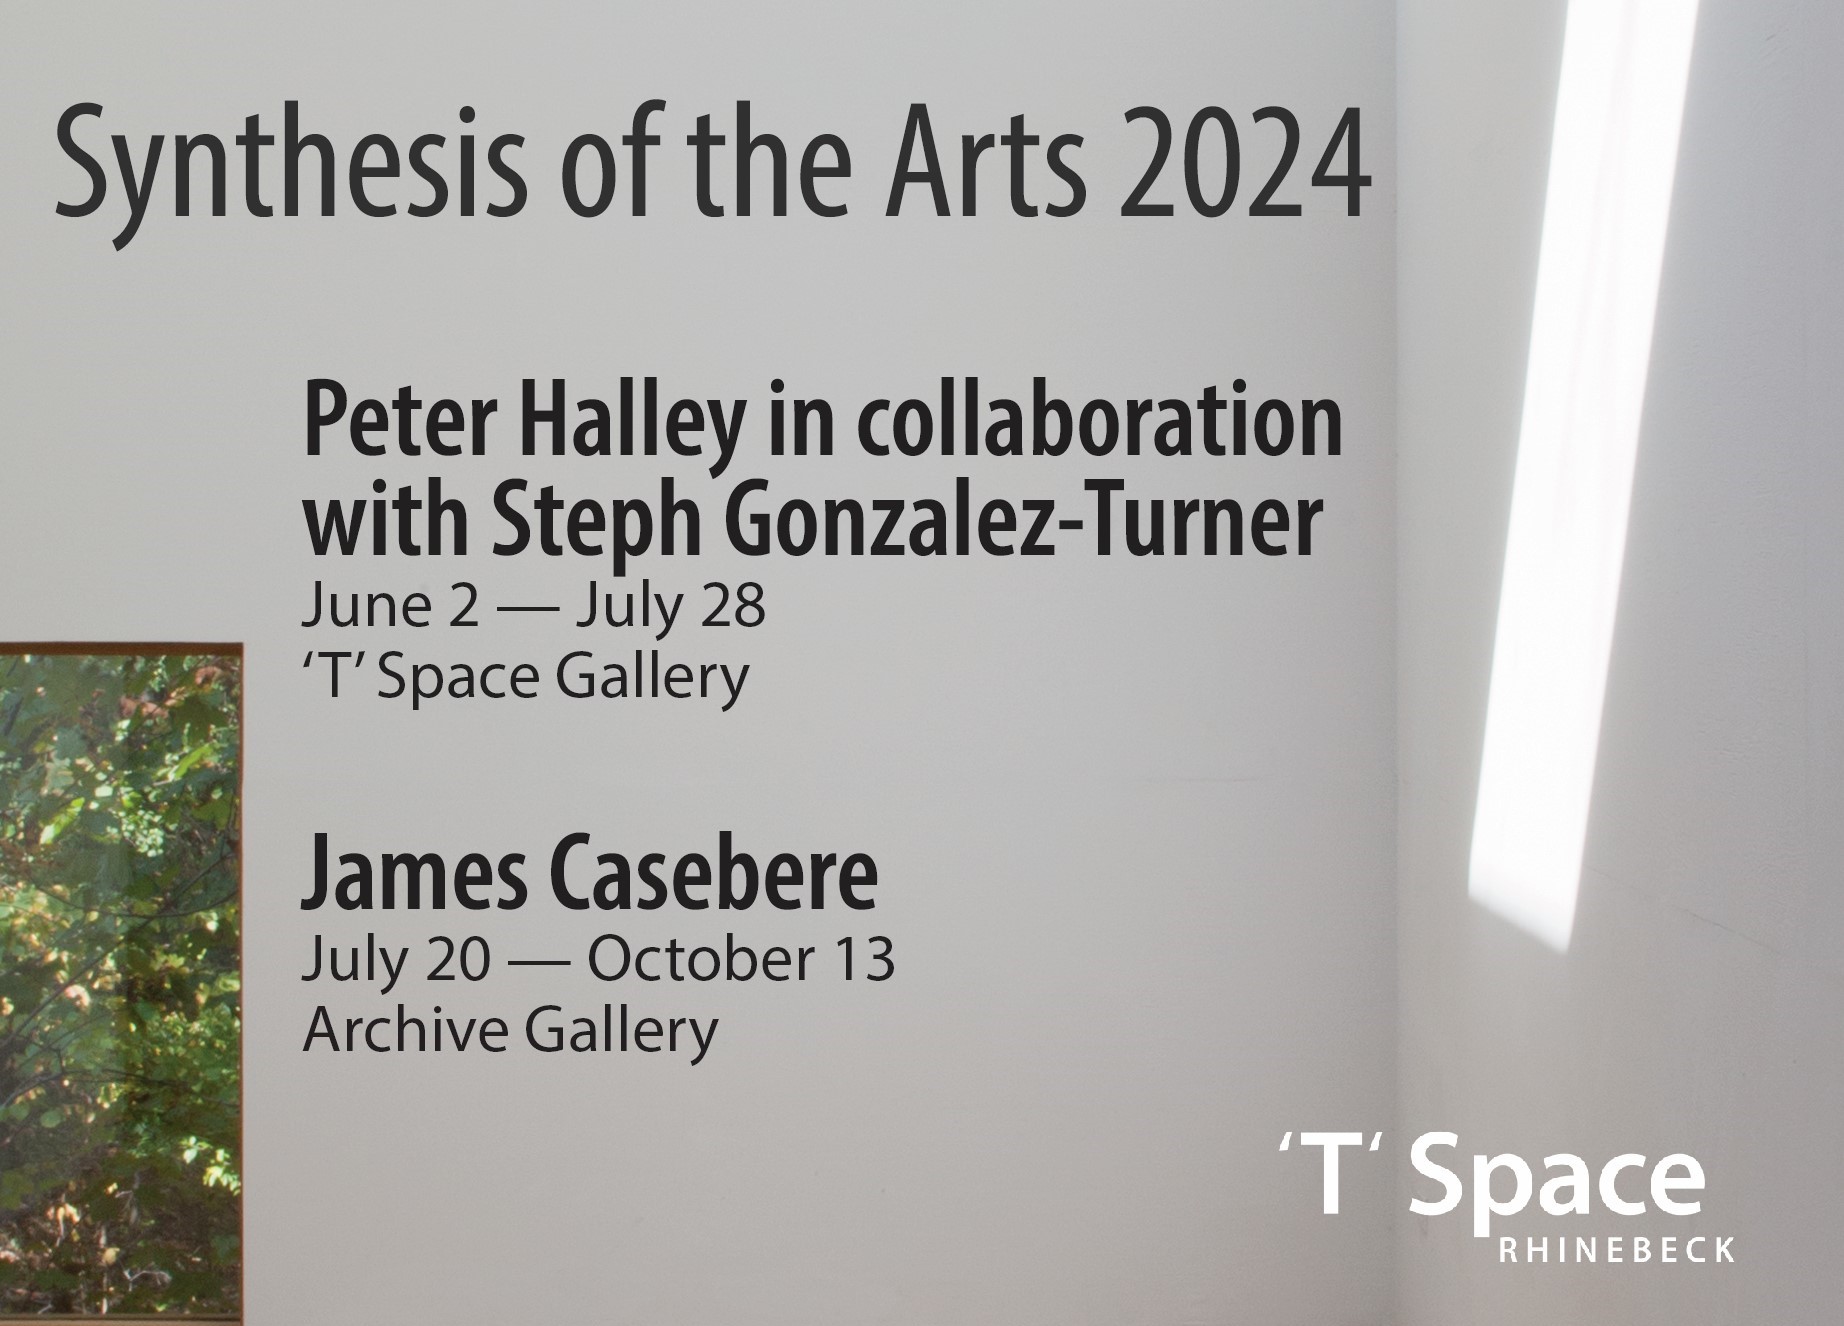 ANNOUNCING SYNTHESIS OF THE ARTS 2024 SEASON